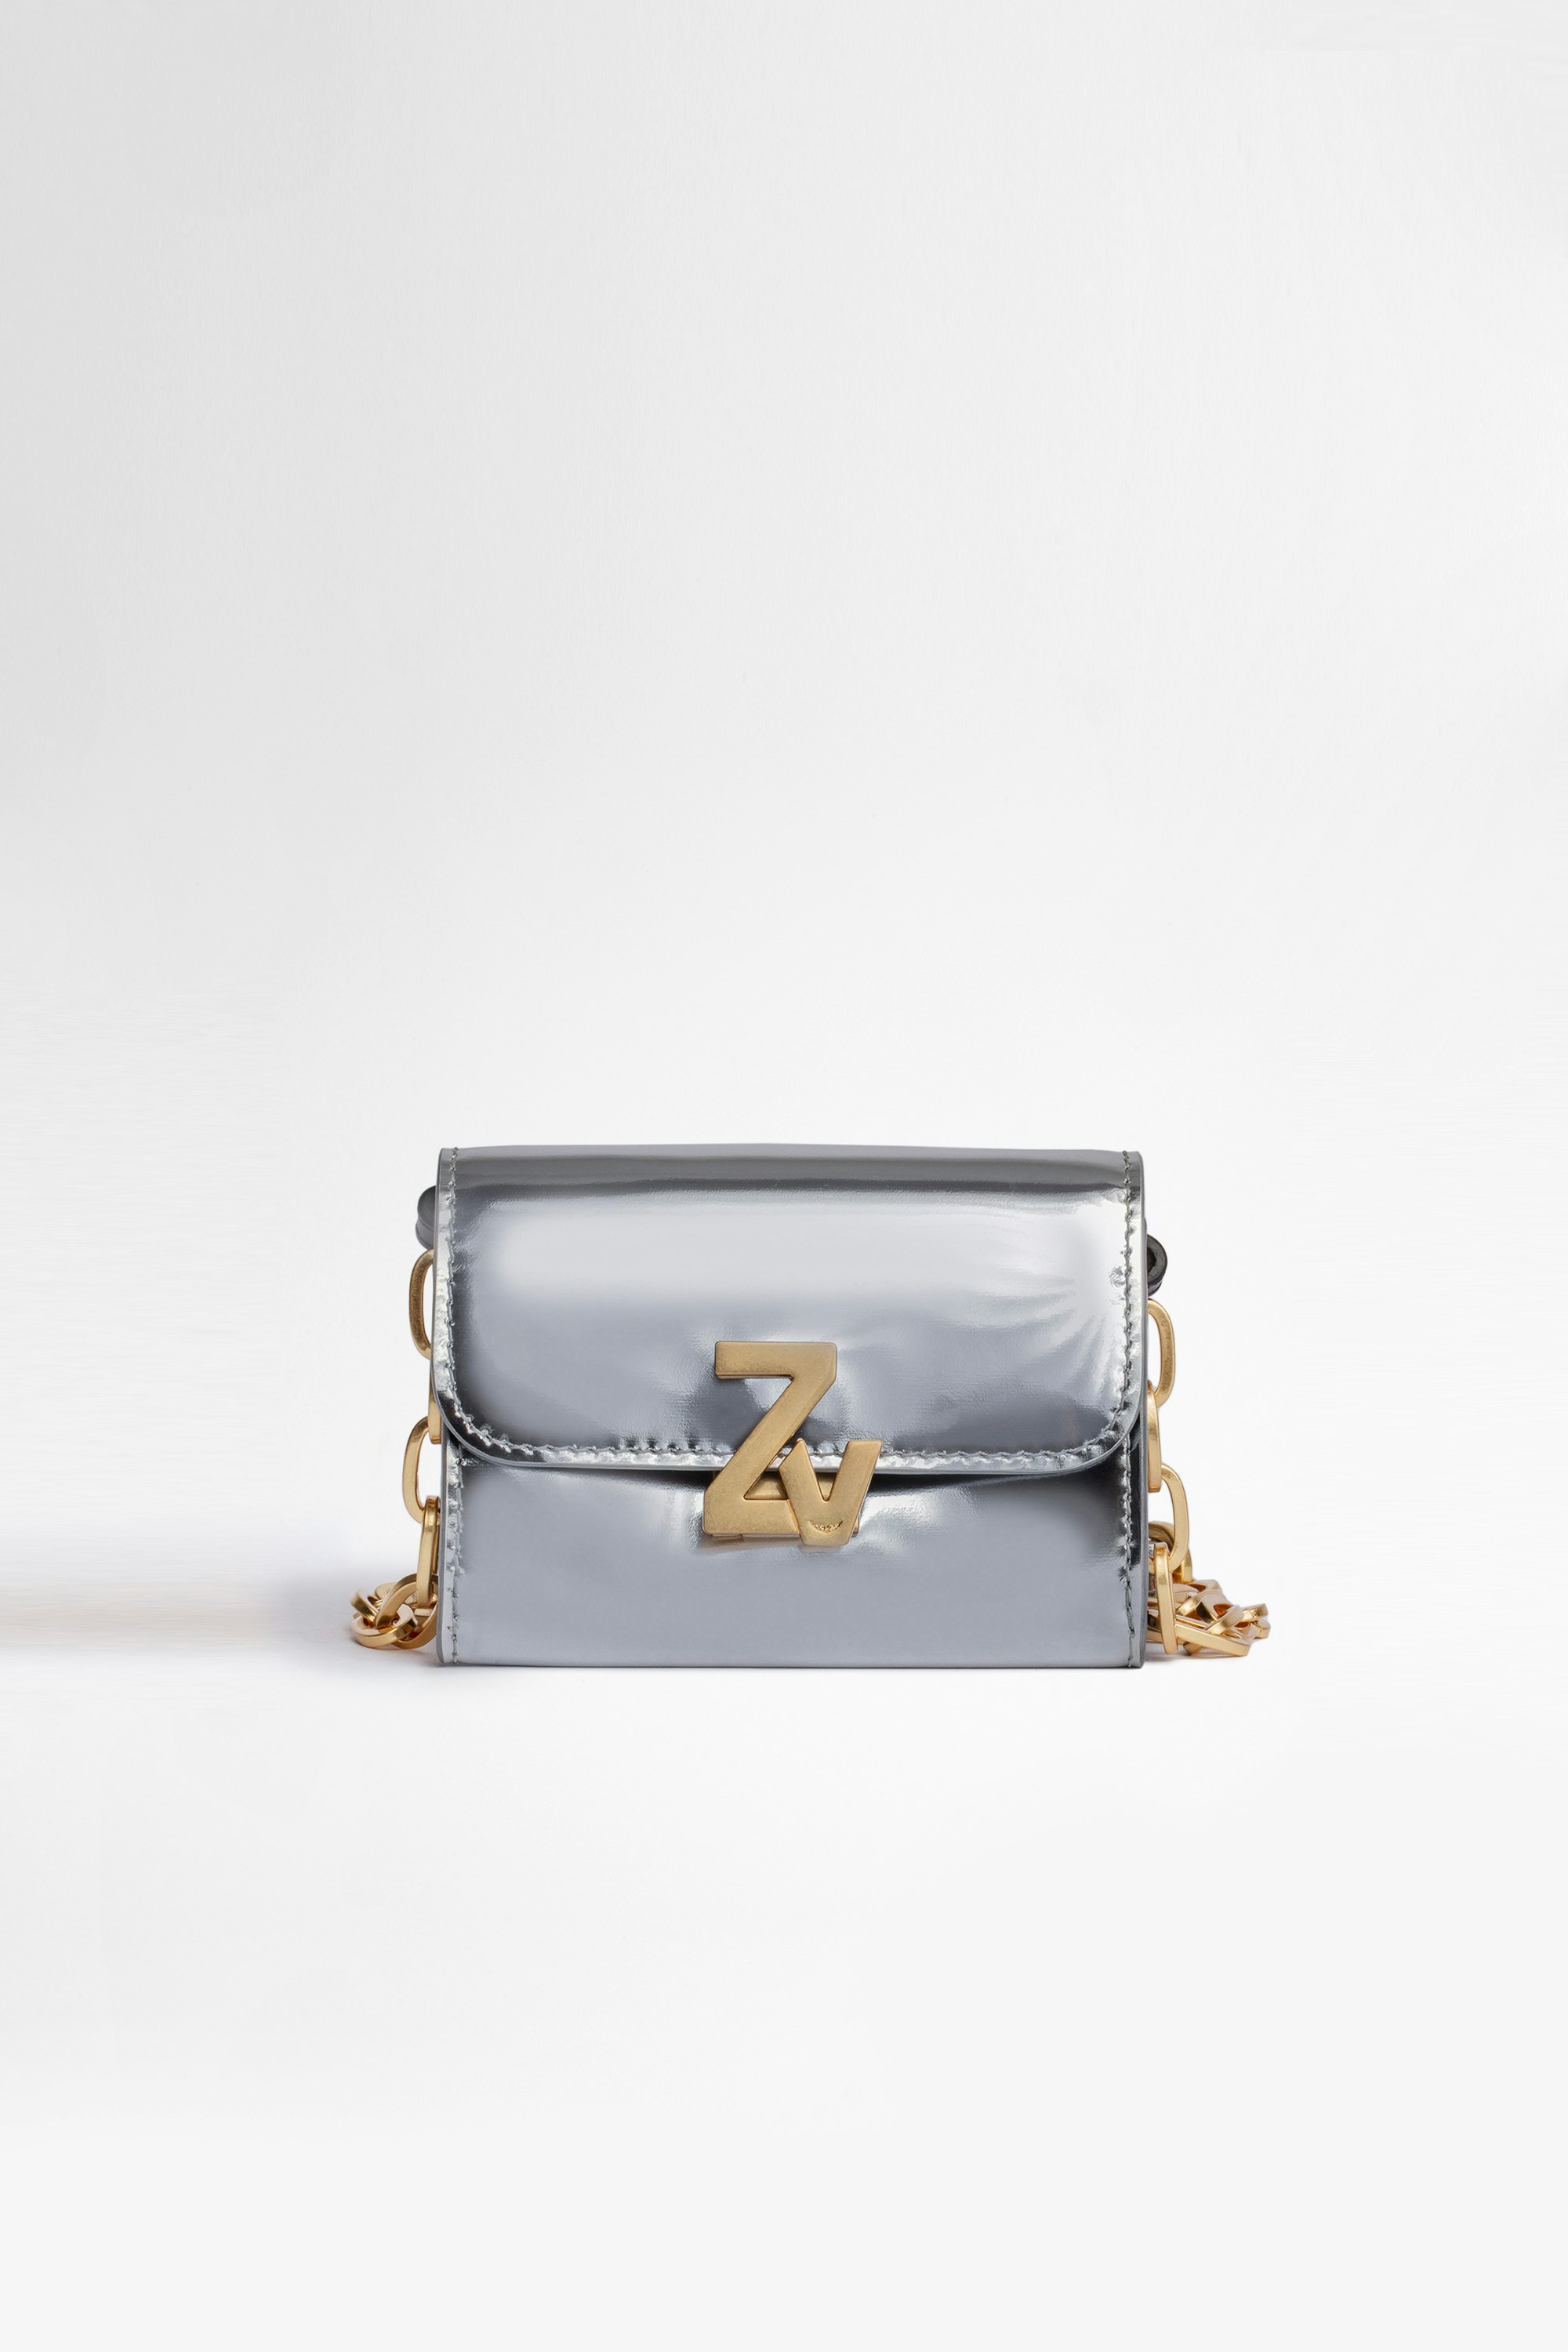 ZV Initiale Le Tiny Unchained Wallet-Style Clutch Women's silver mirror-effect leather wallet